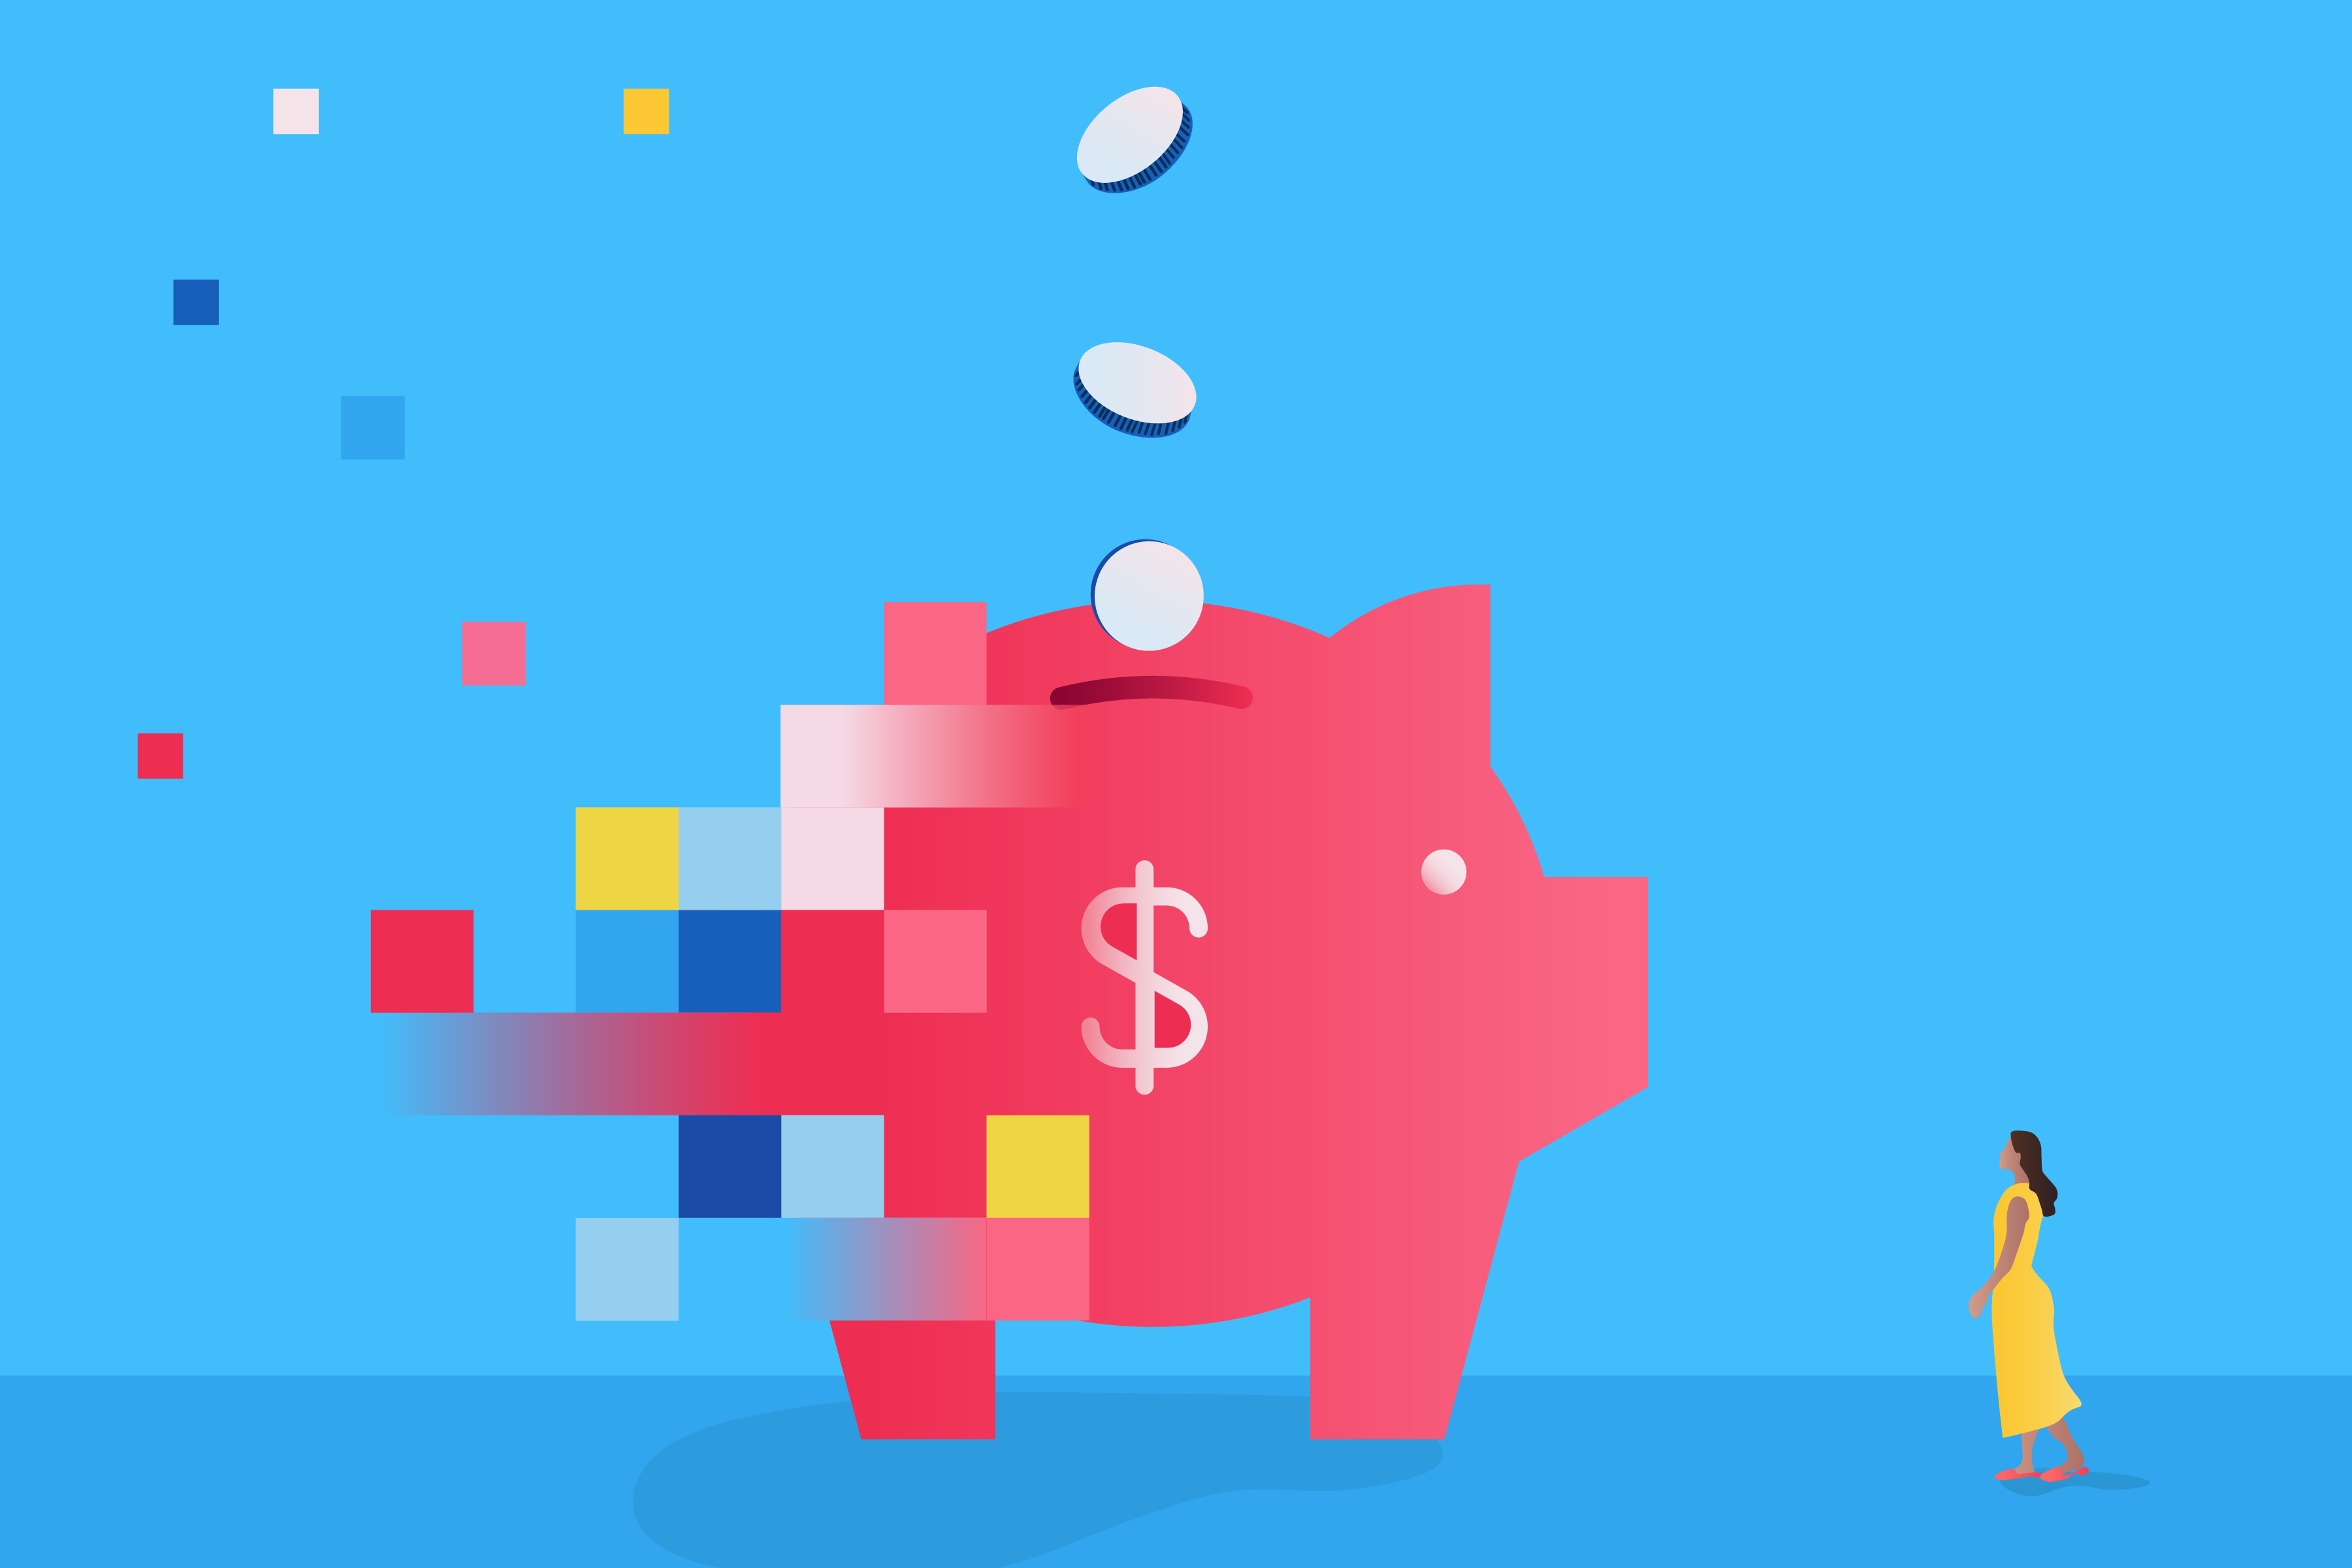 Piggy bank illustration with falling coins